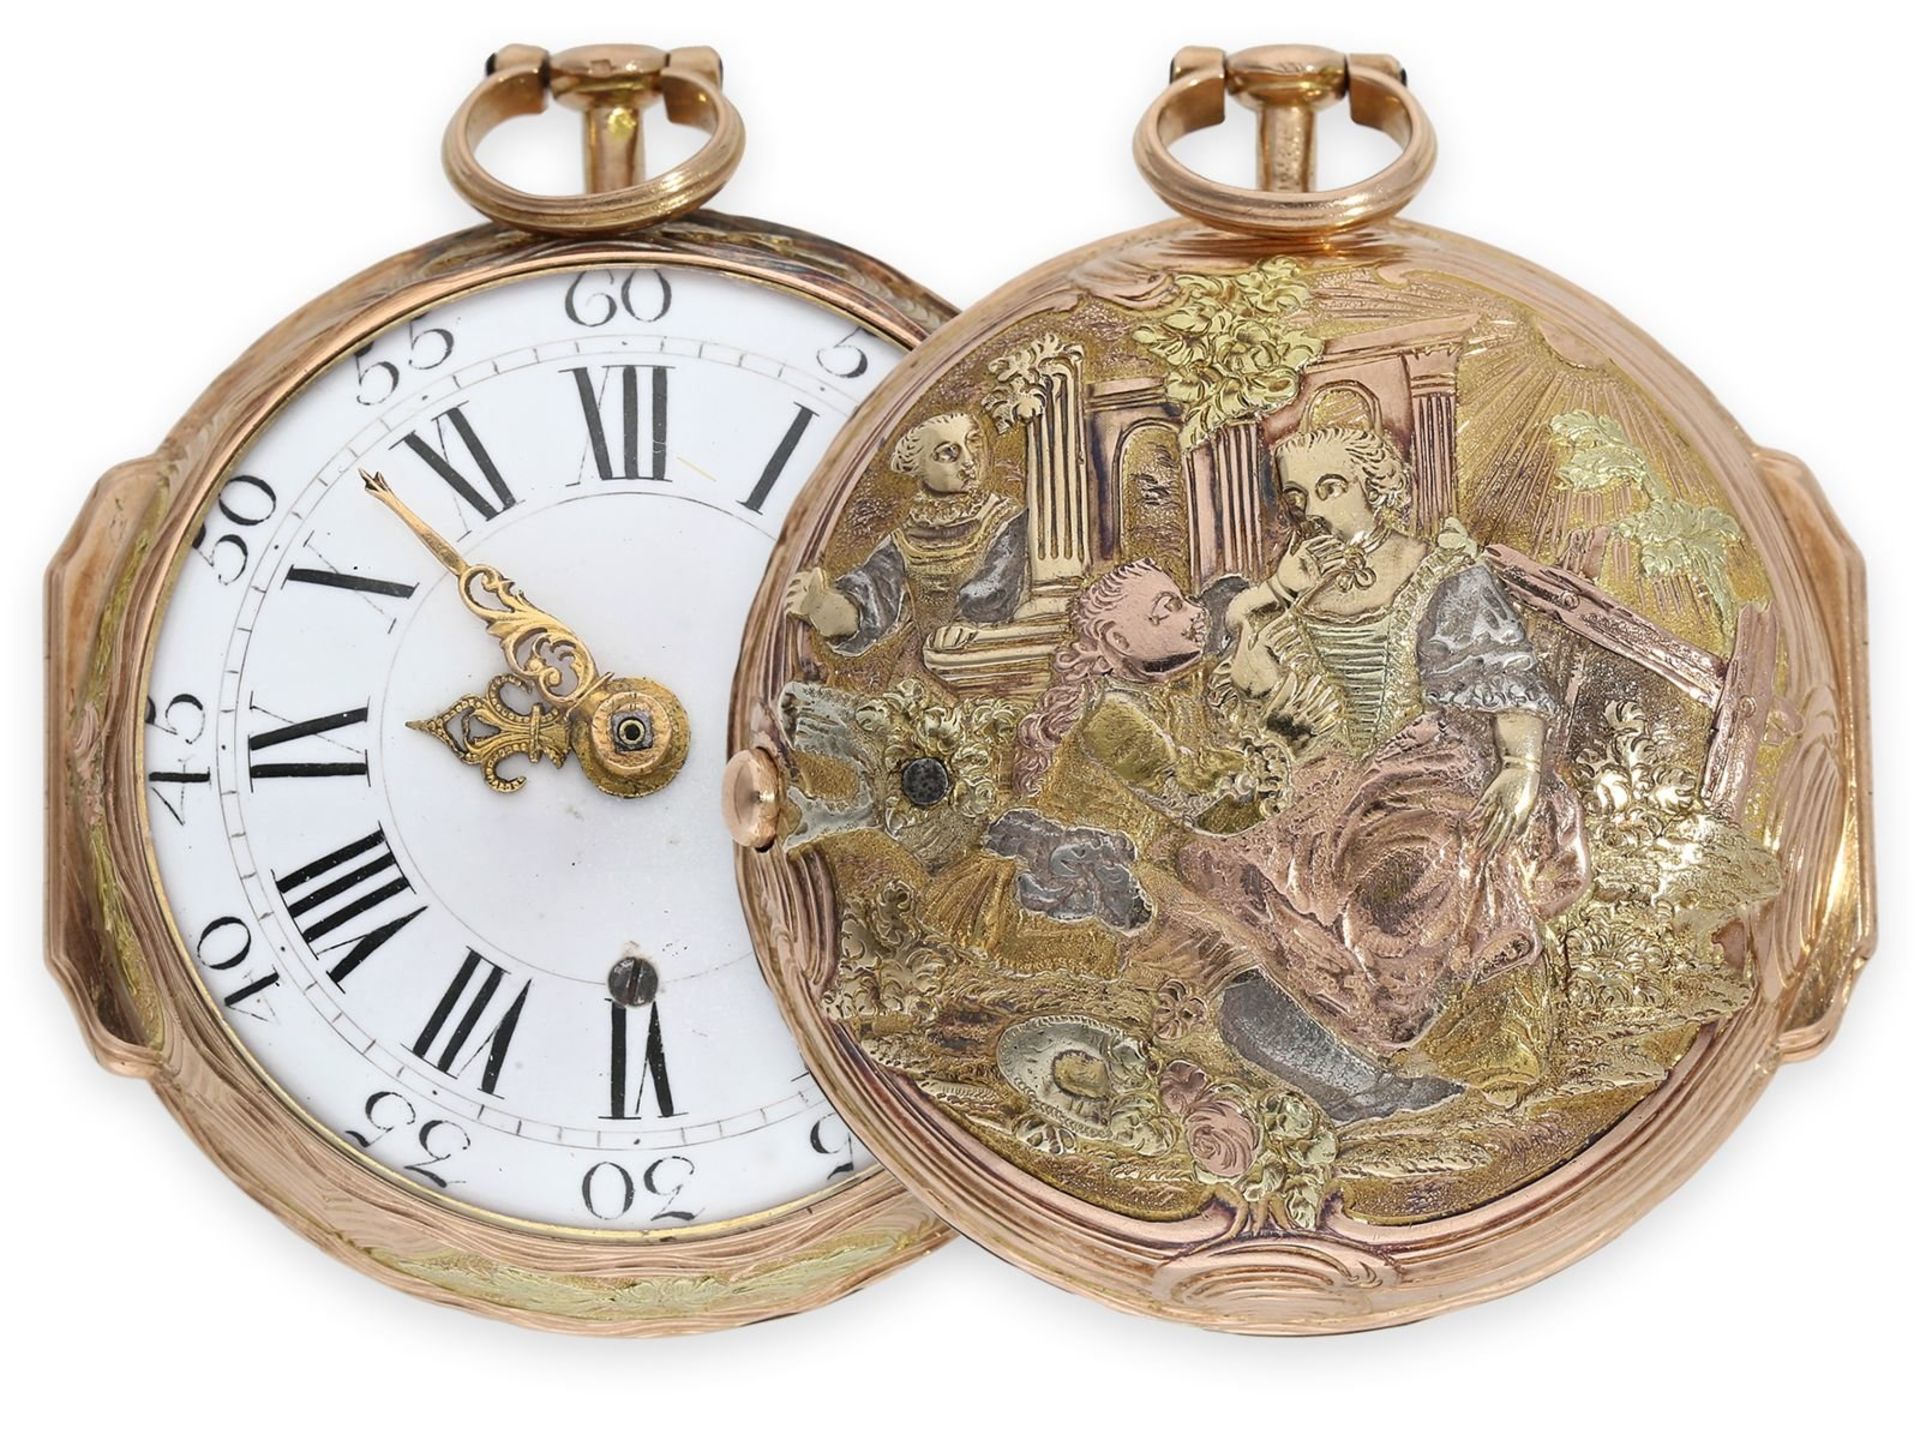 Pocket watch: magnificent German Rococo verge watch with 4-colour gold case and very elaborate and